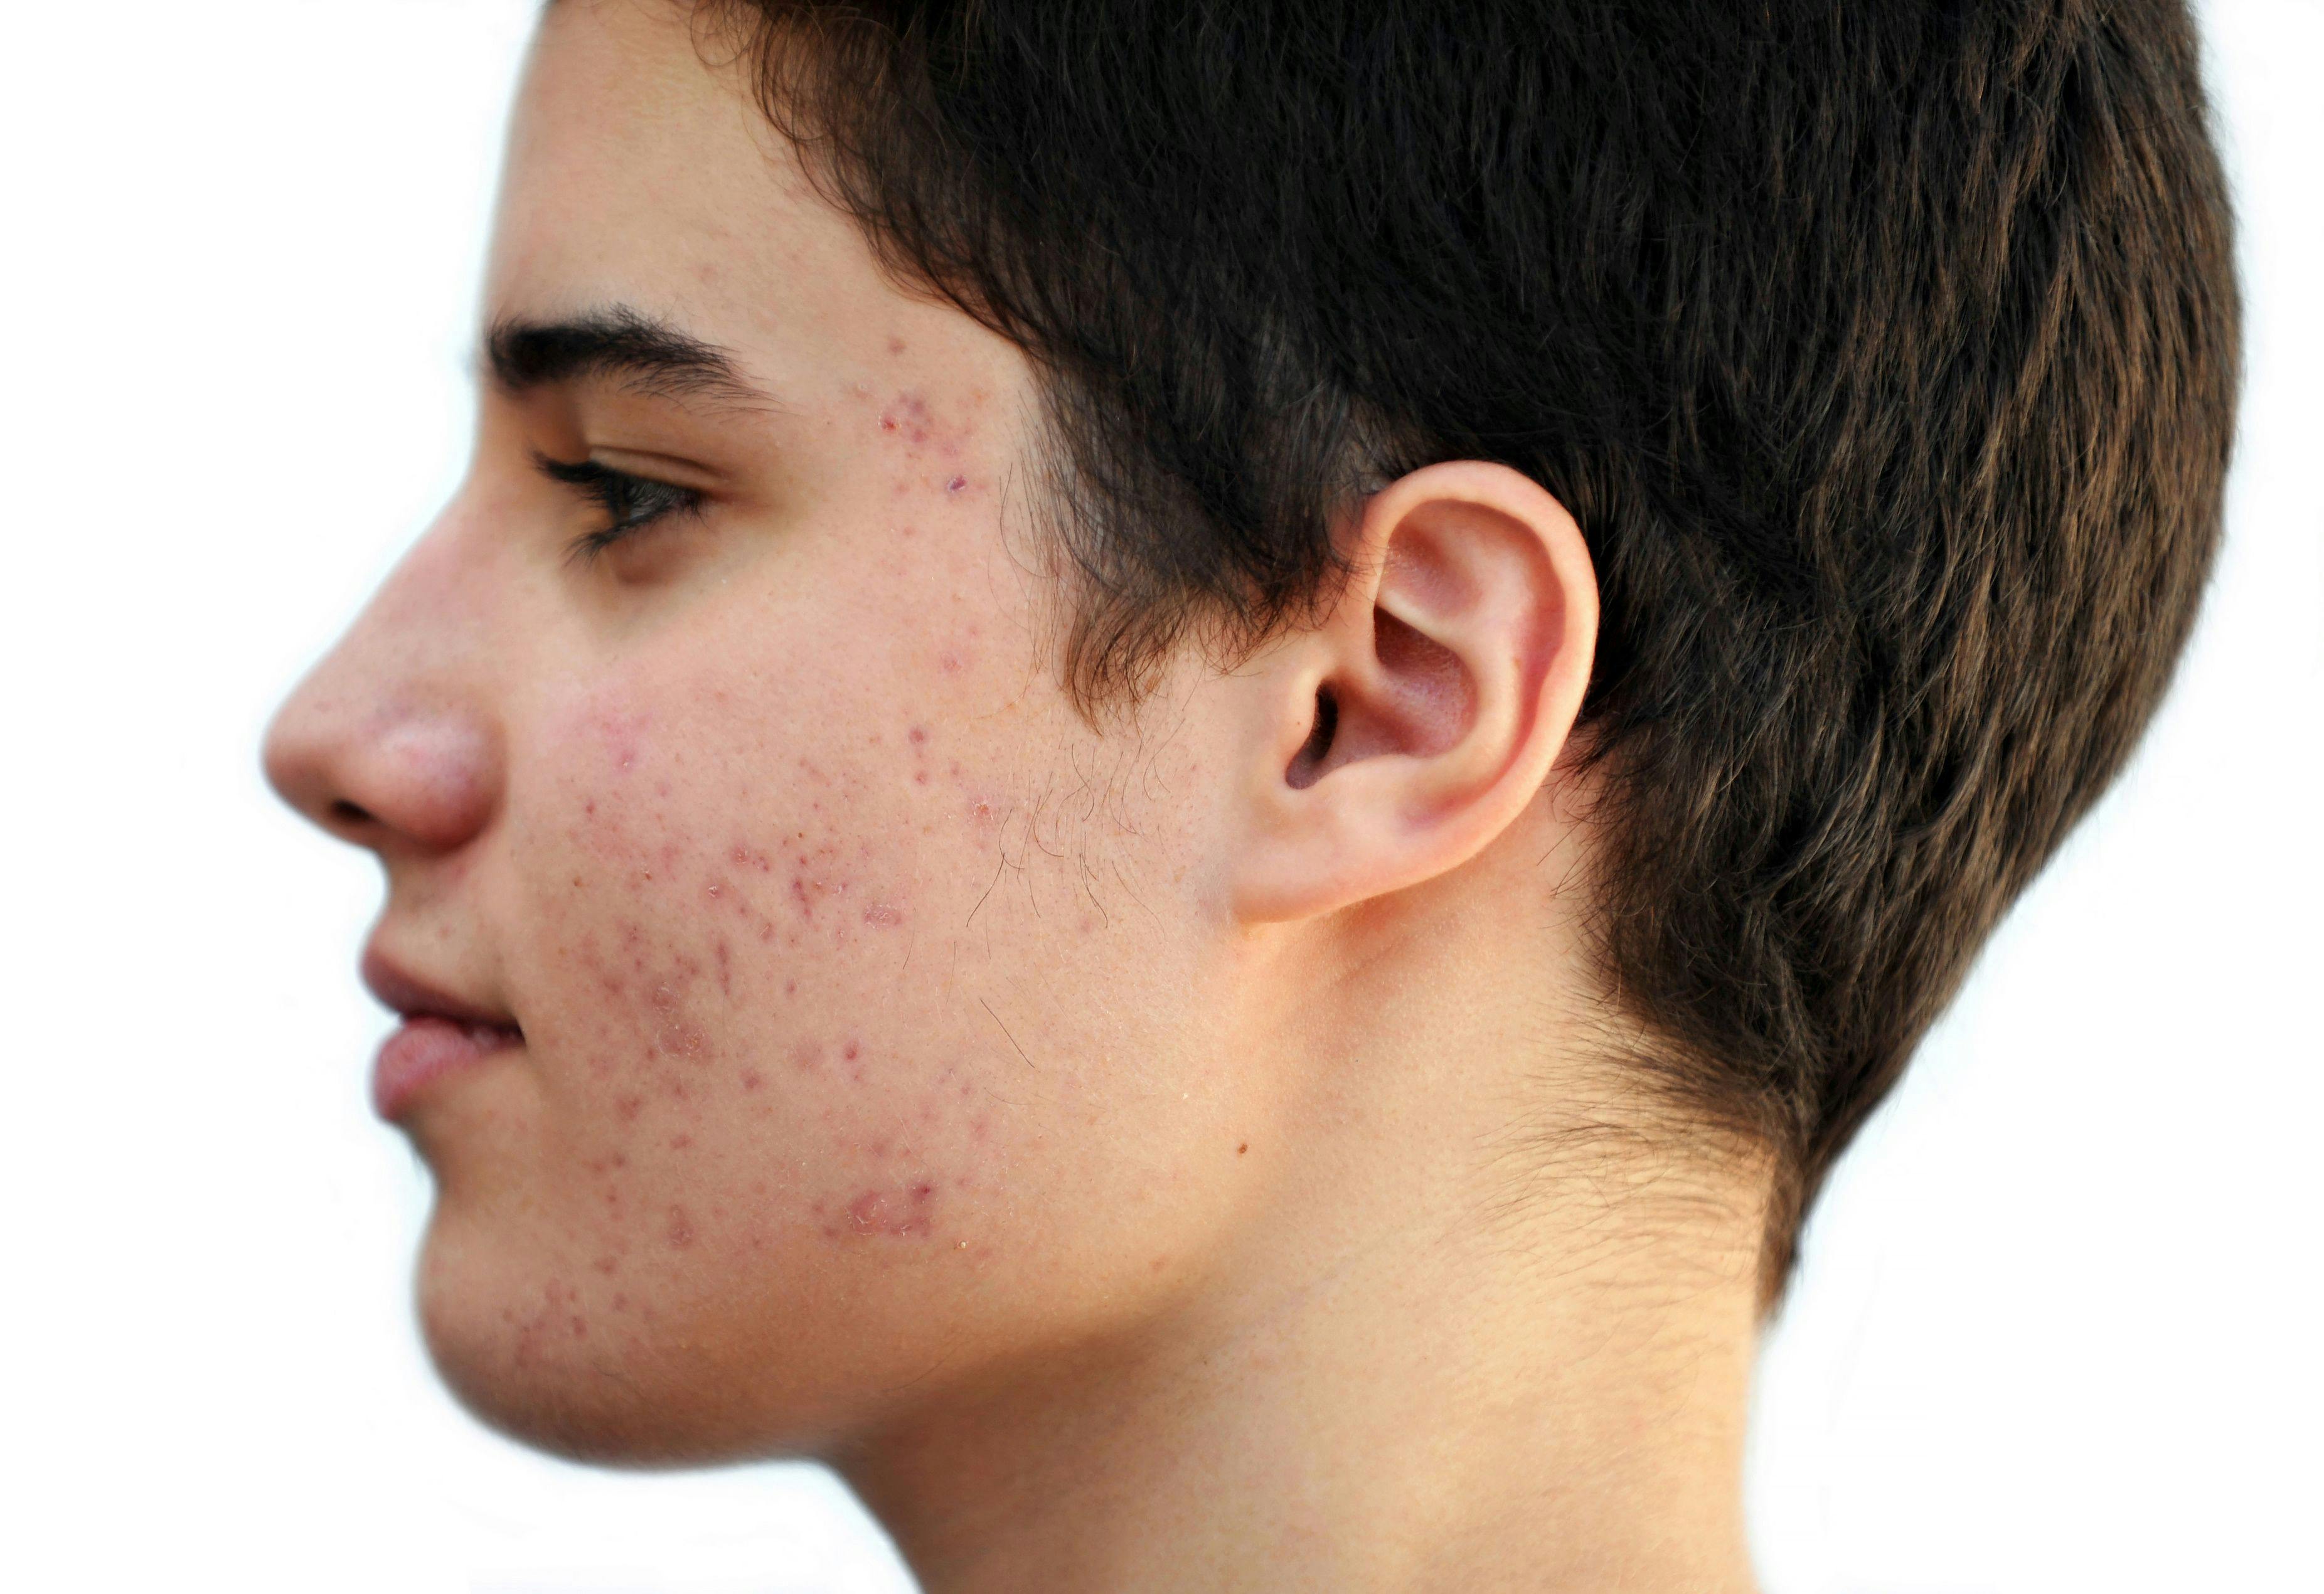 Adolescent acne therapies benefit younger children